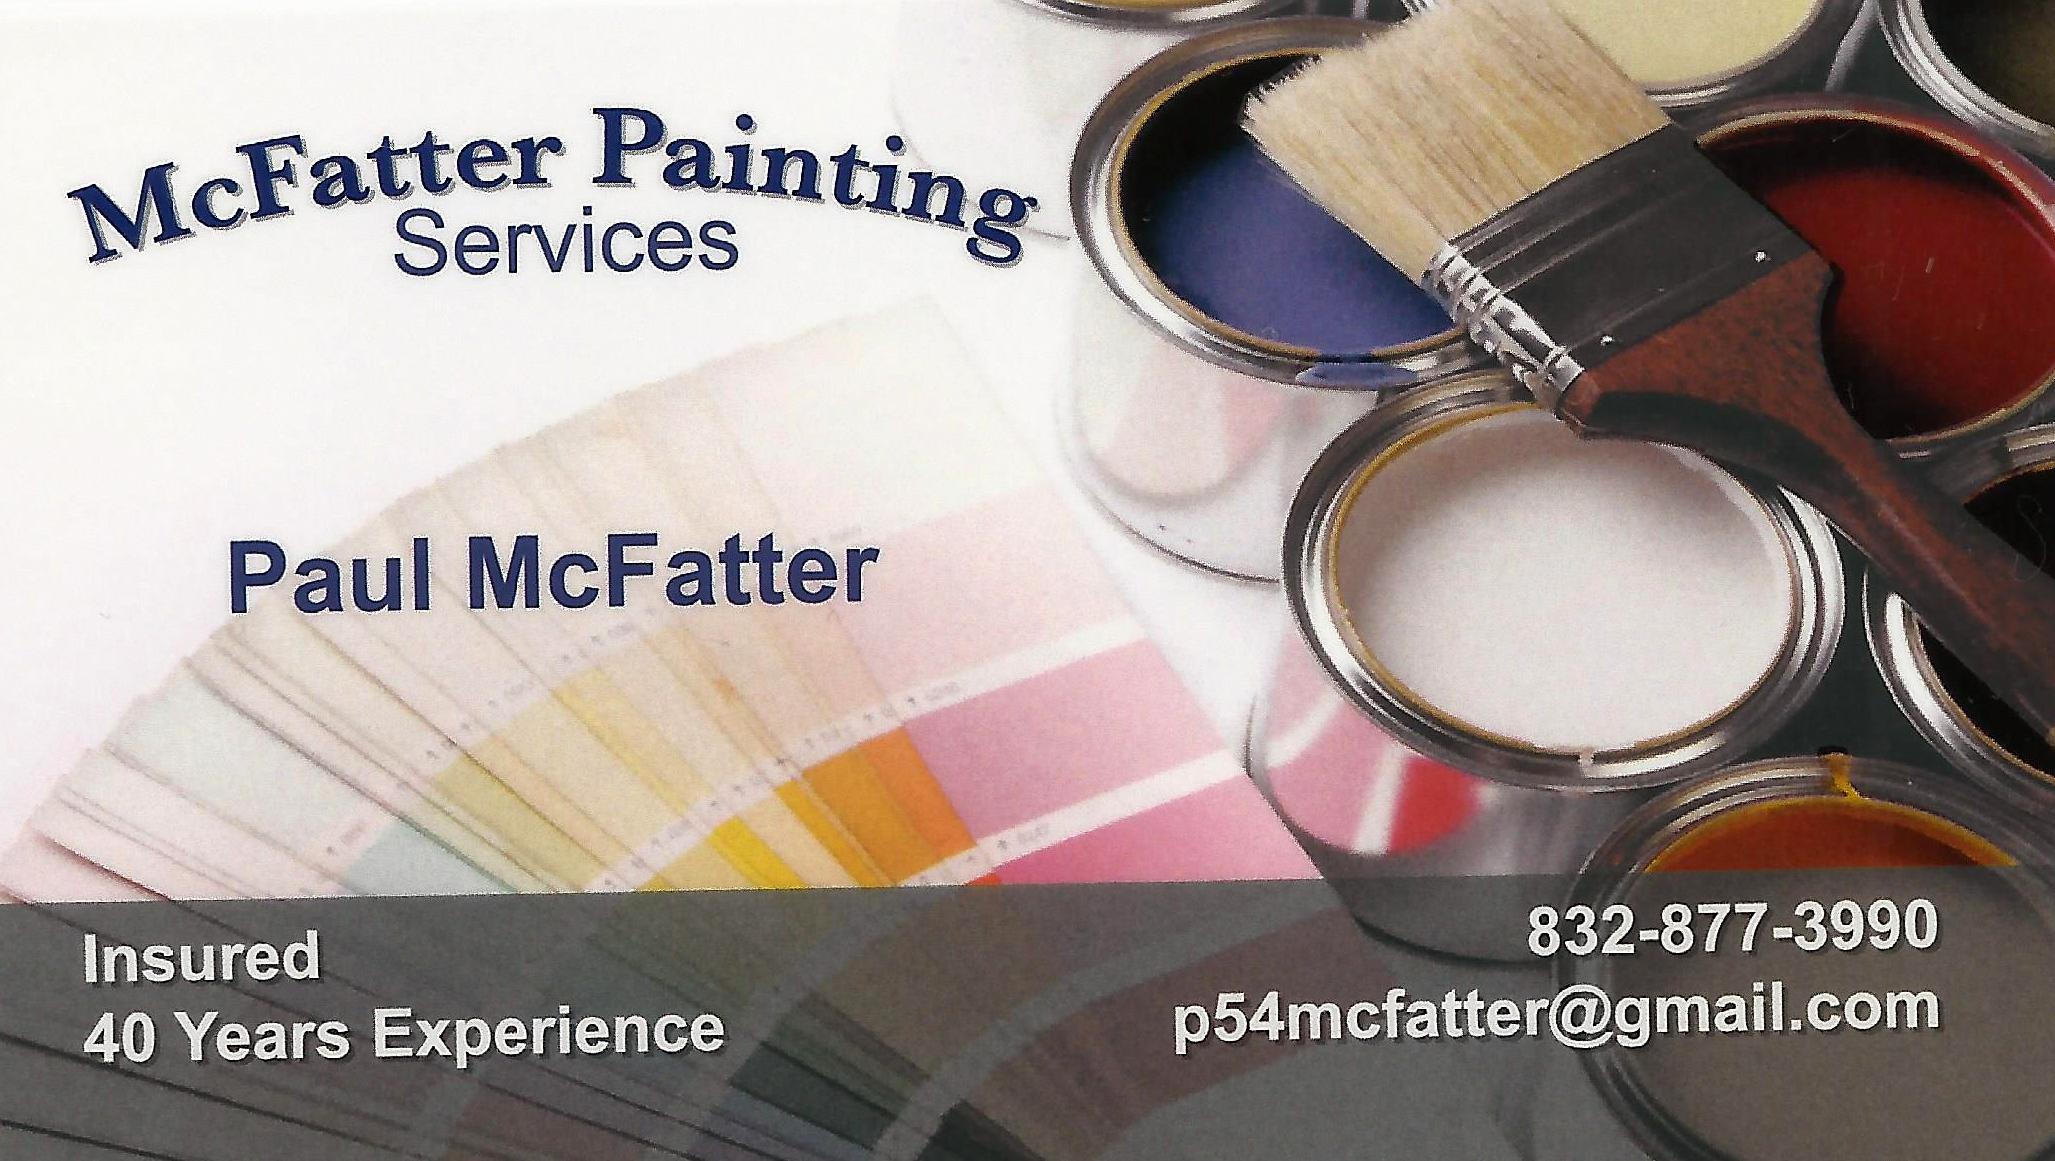 McFatter Painting Services Logo